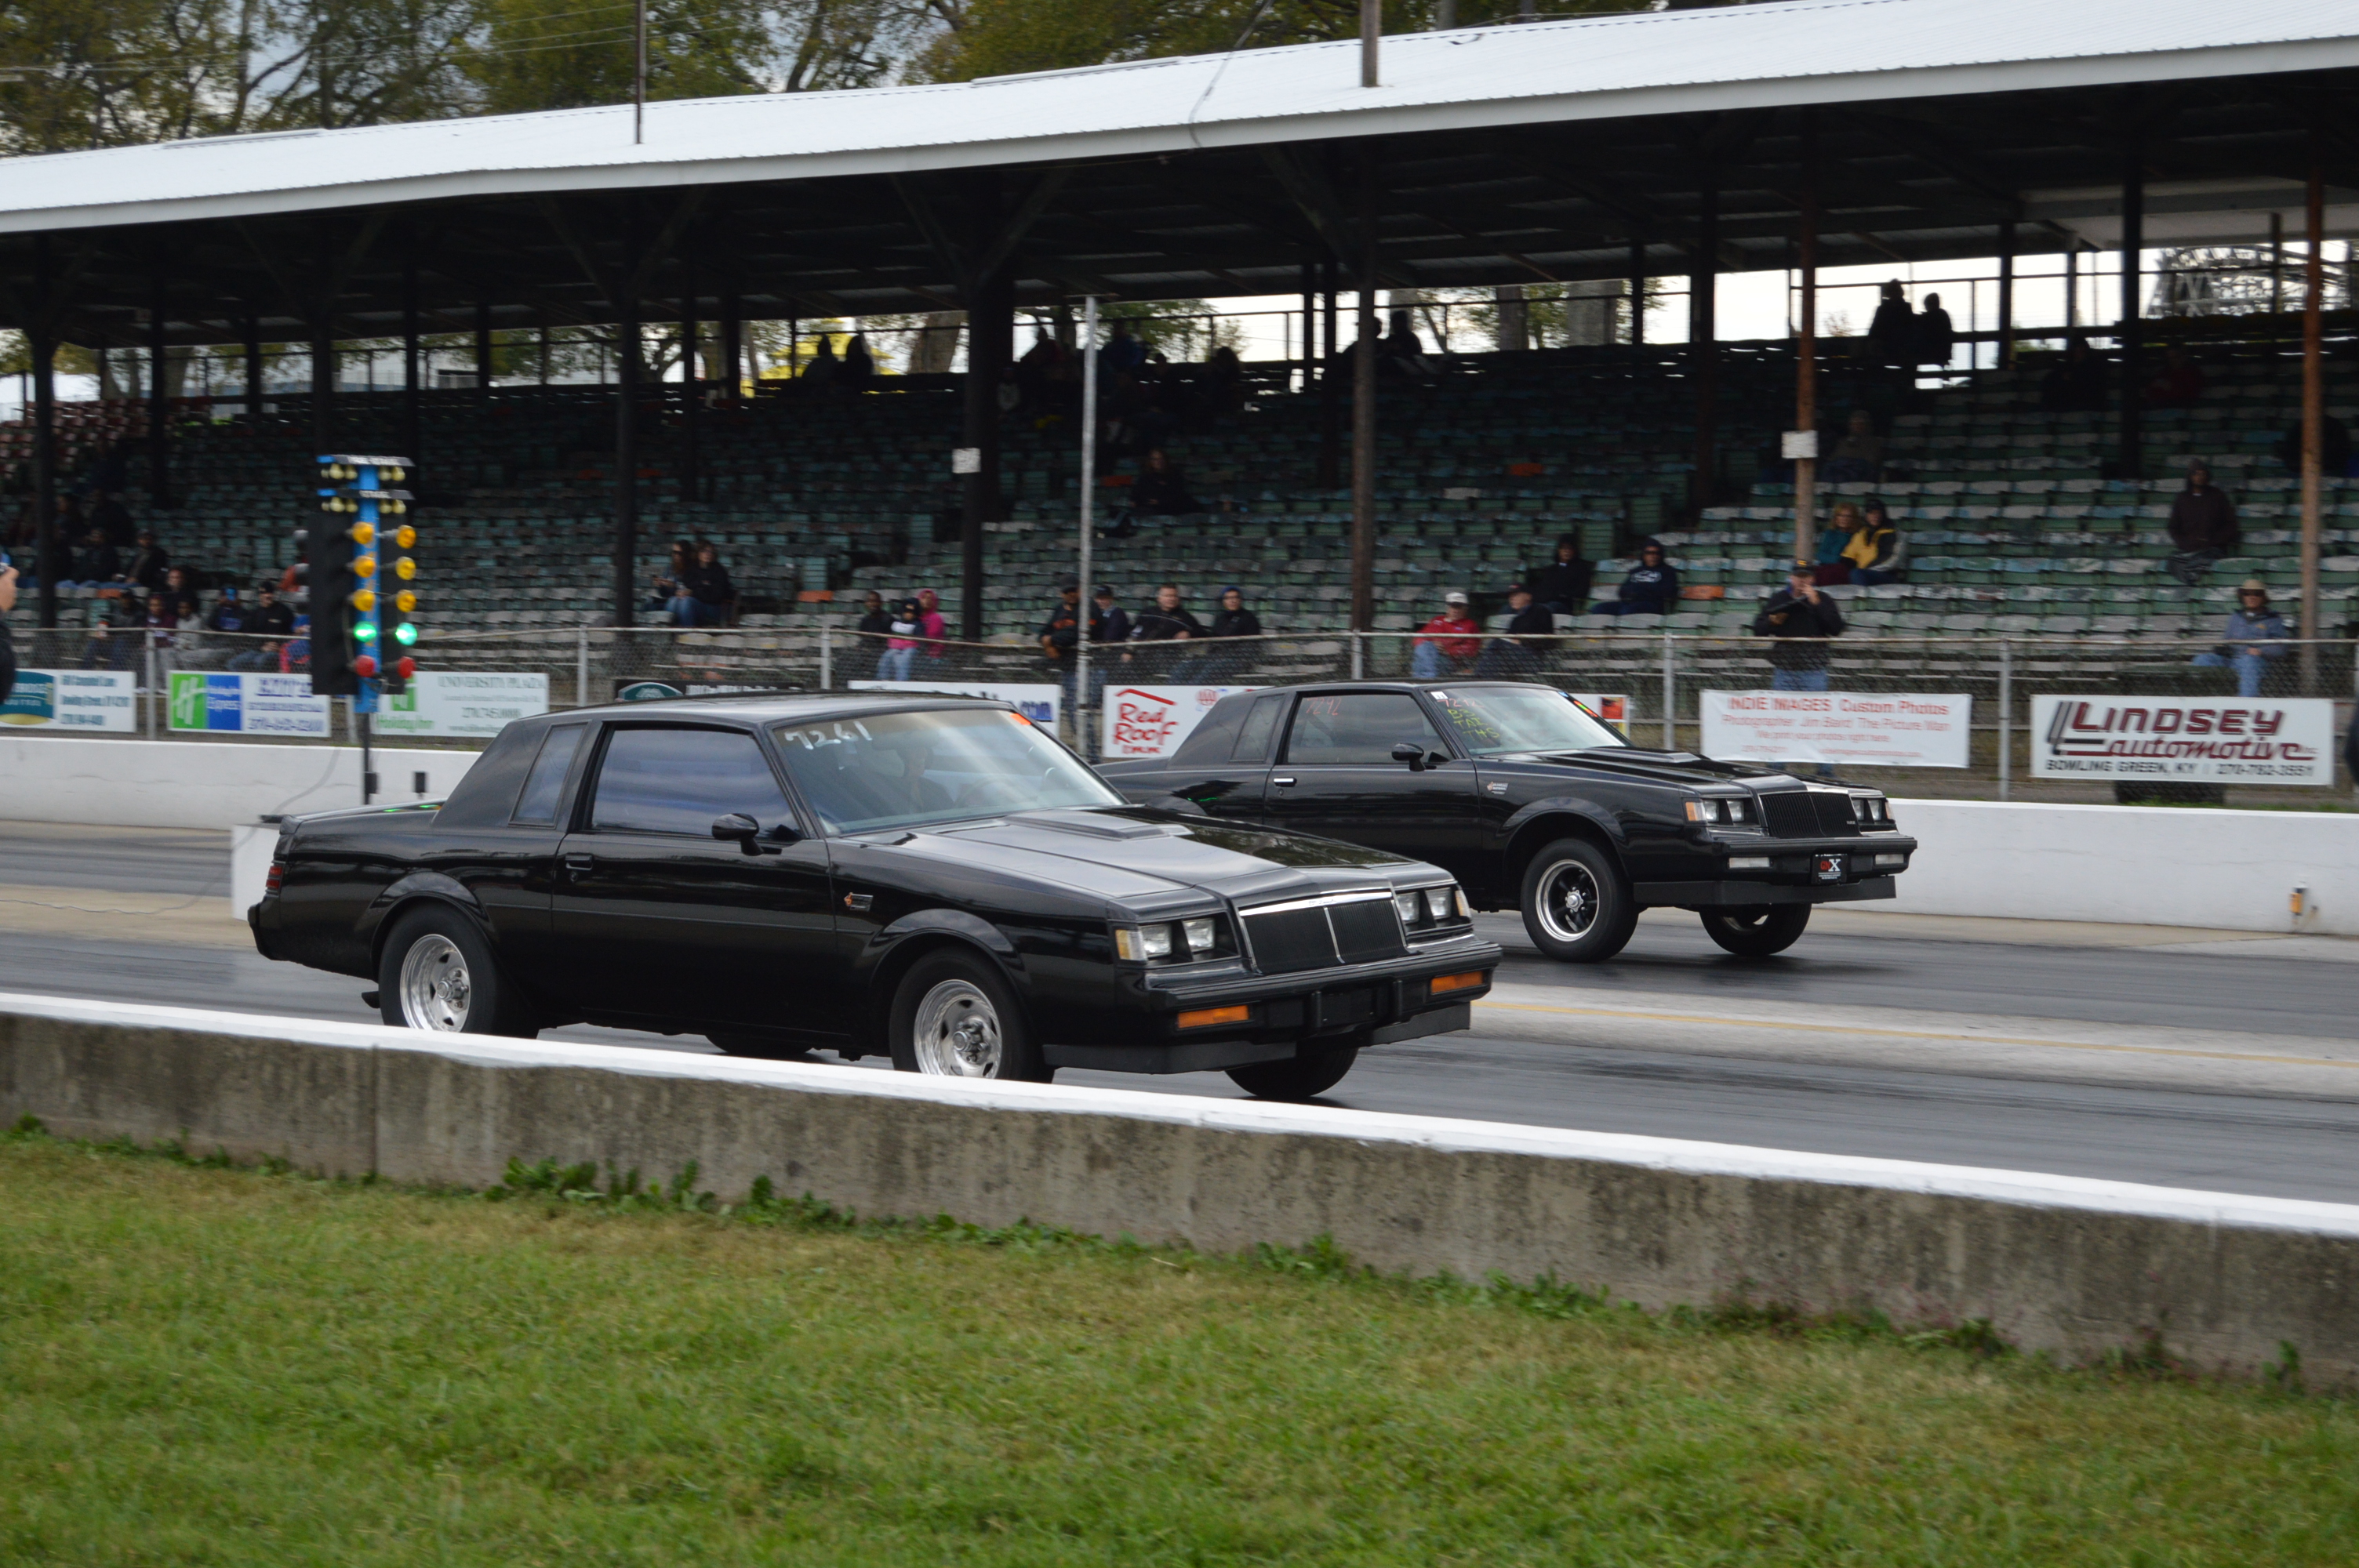 2014 Buick GS Nationals DVD Now Available!